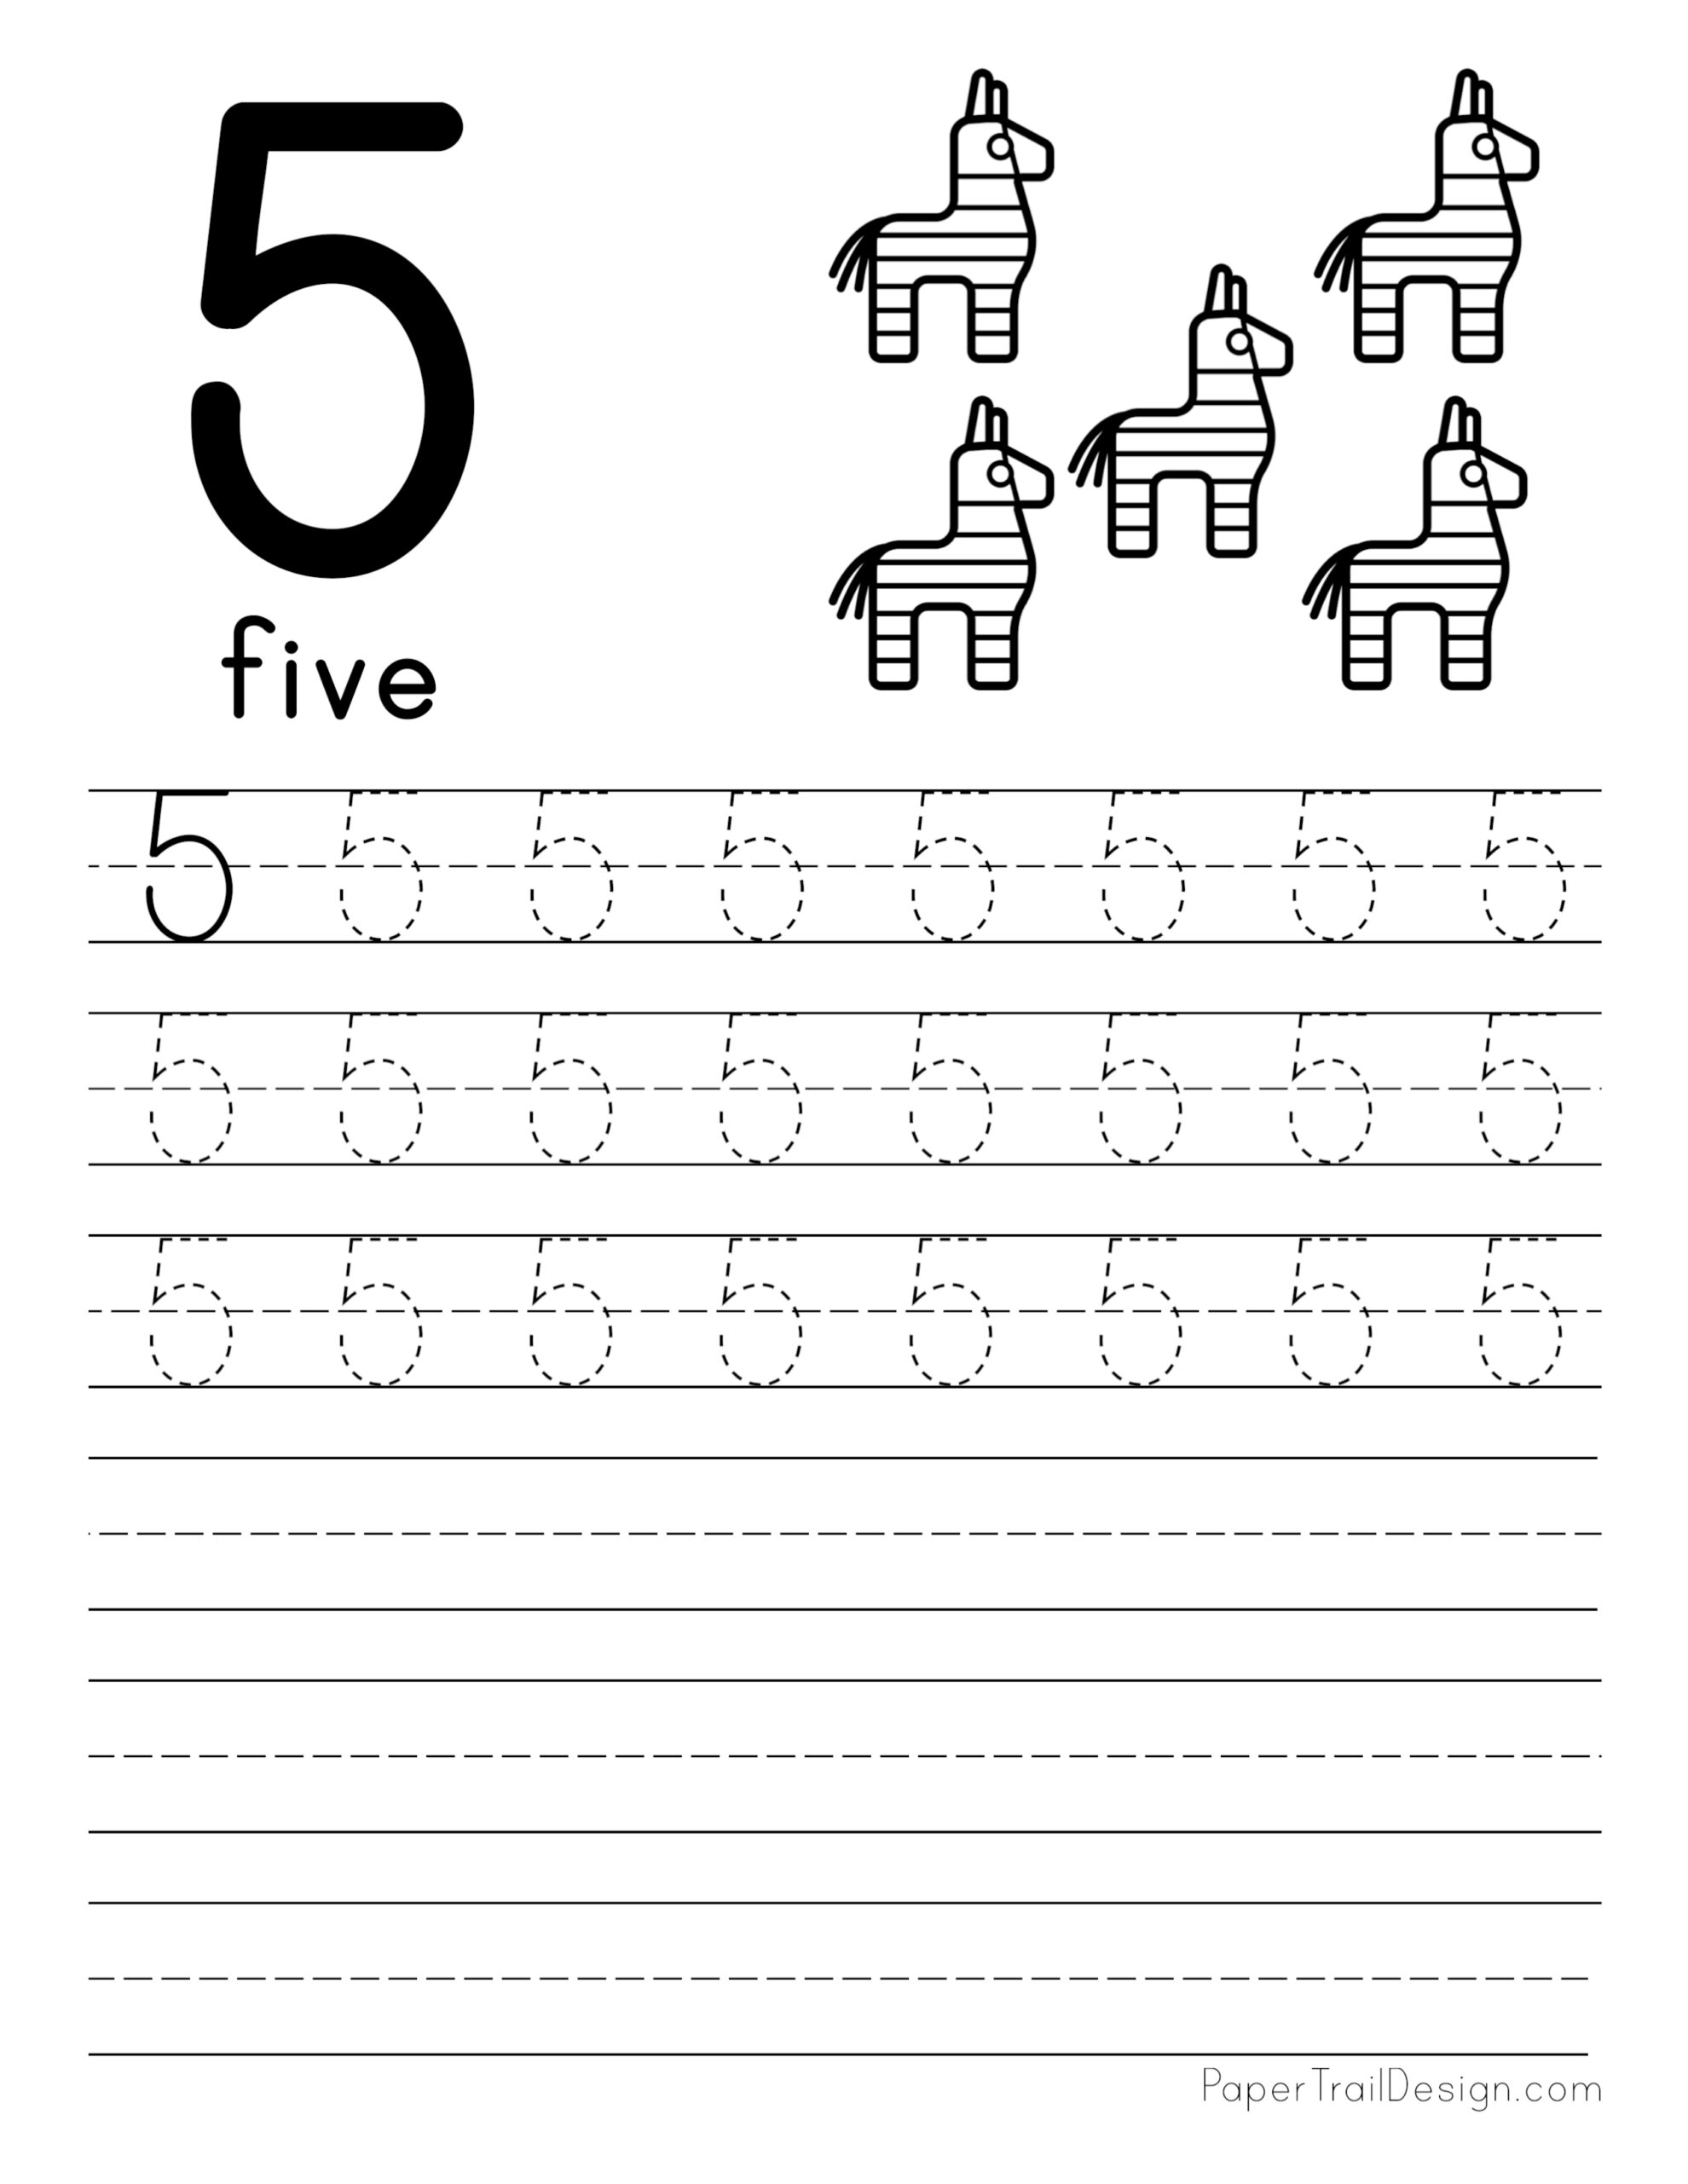 free-number-tracing-worksheets-paper-trail-design